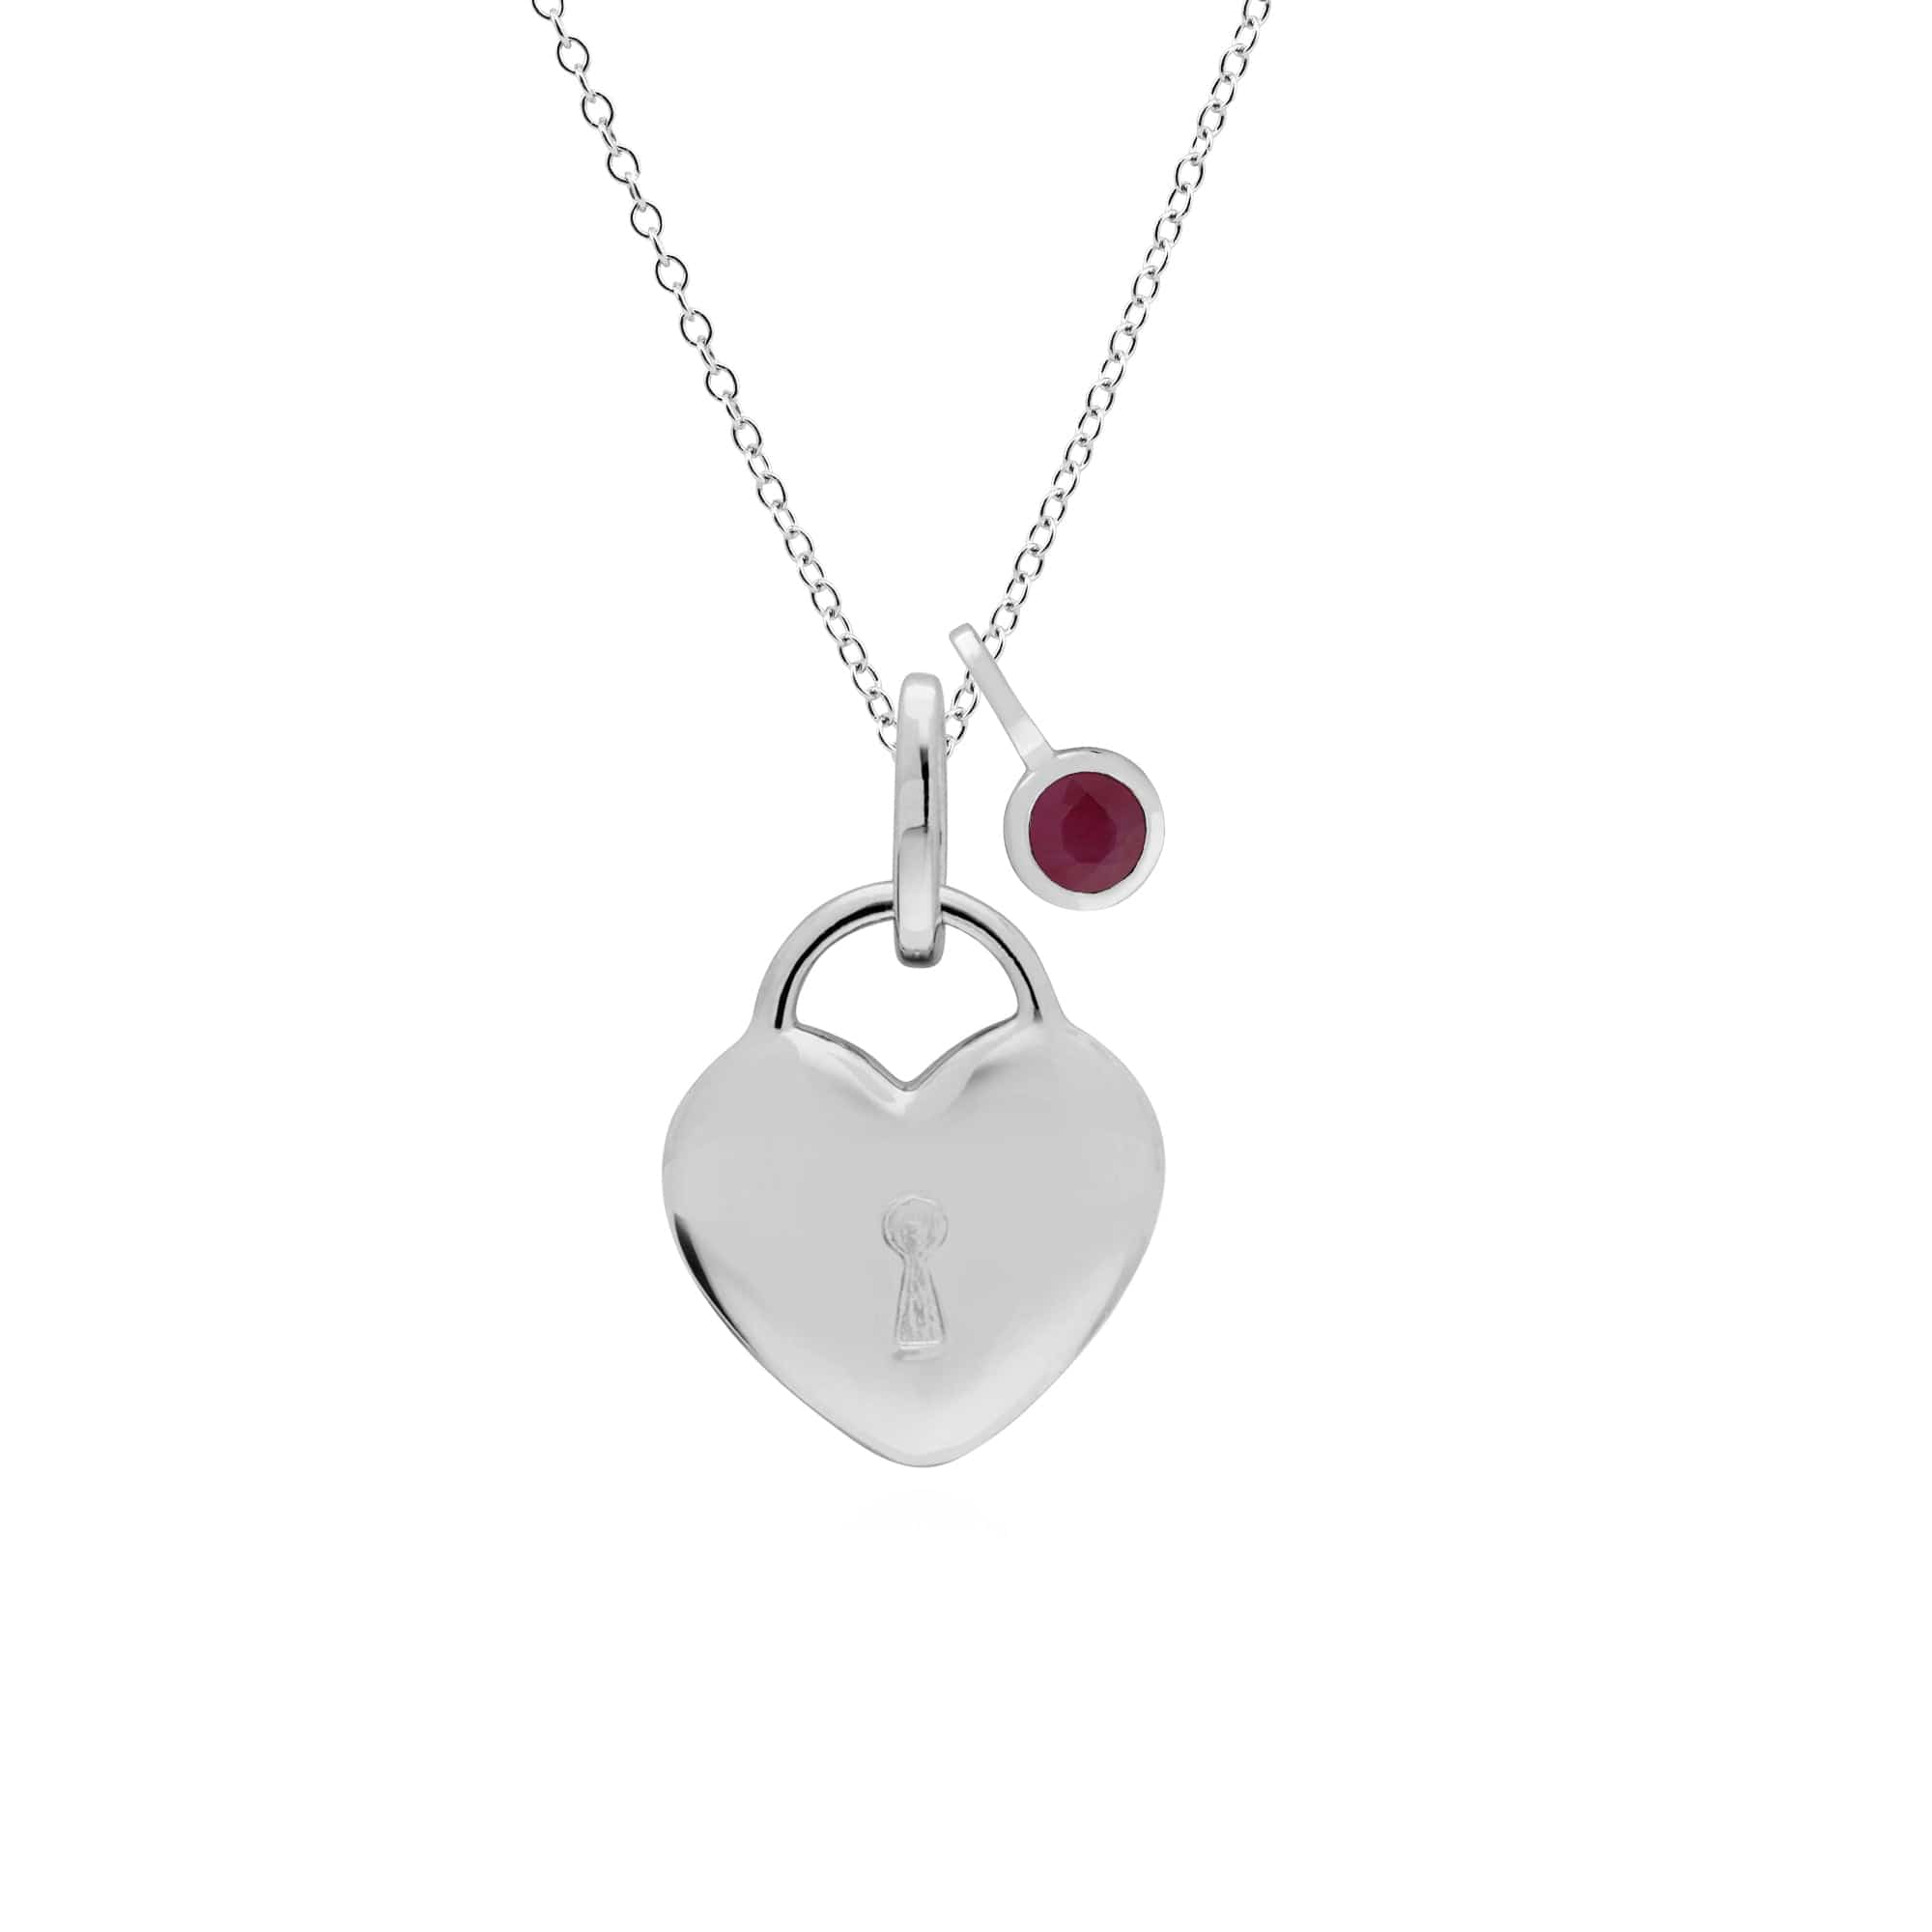 270P027609925-270P027001925 Classic Heart Lock Pendant & Ruby Charm in 925 Sterling Silver 1